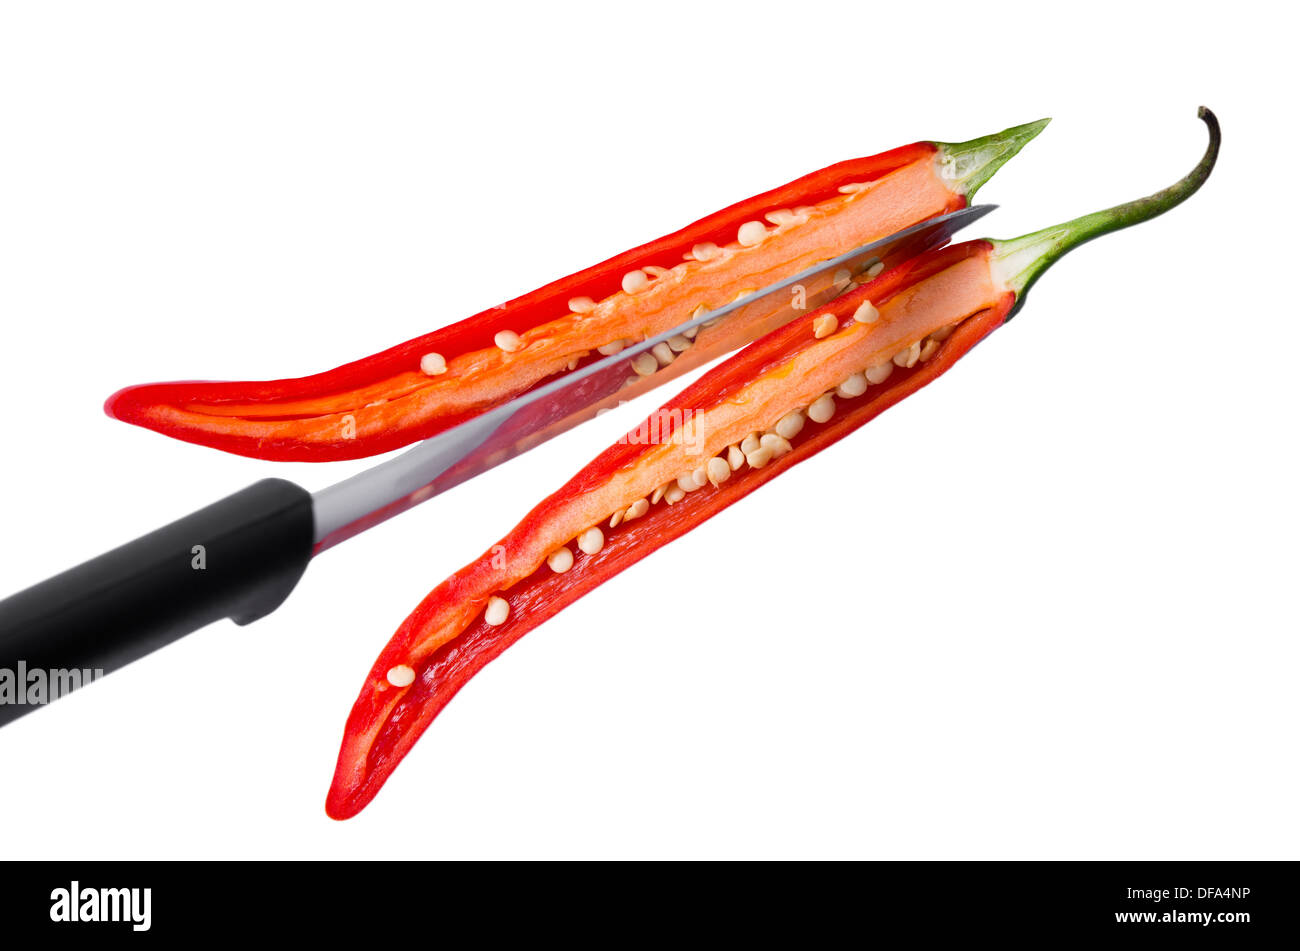 red pepper isolated on white background Stock Photo